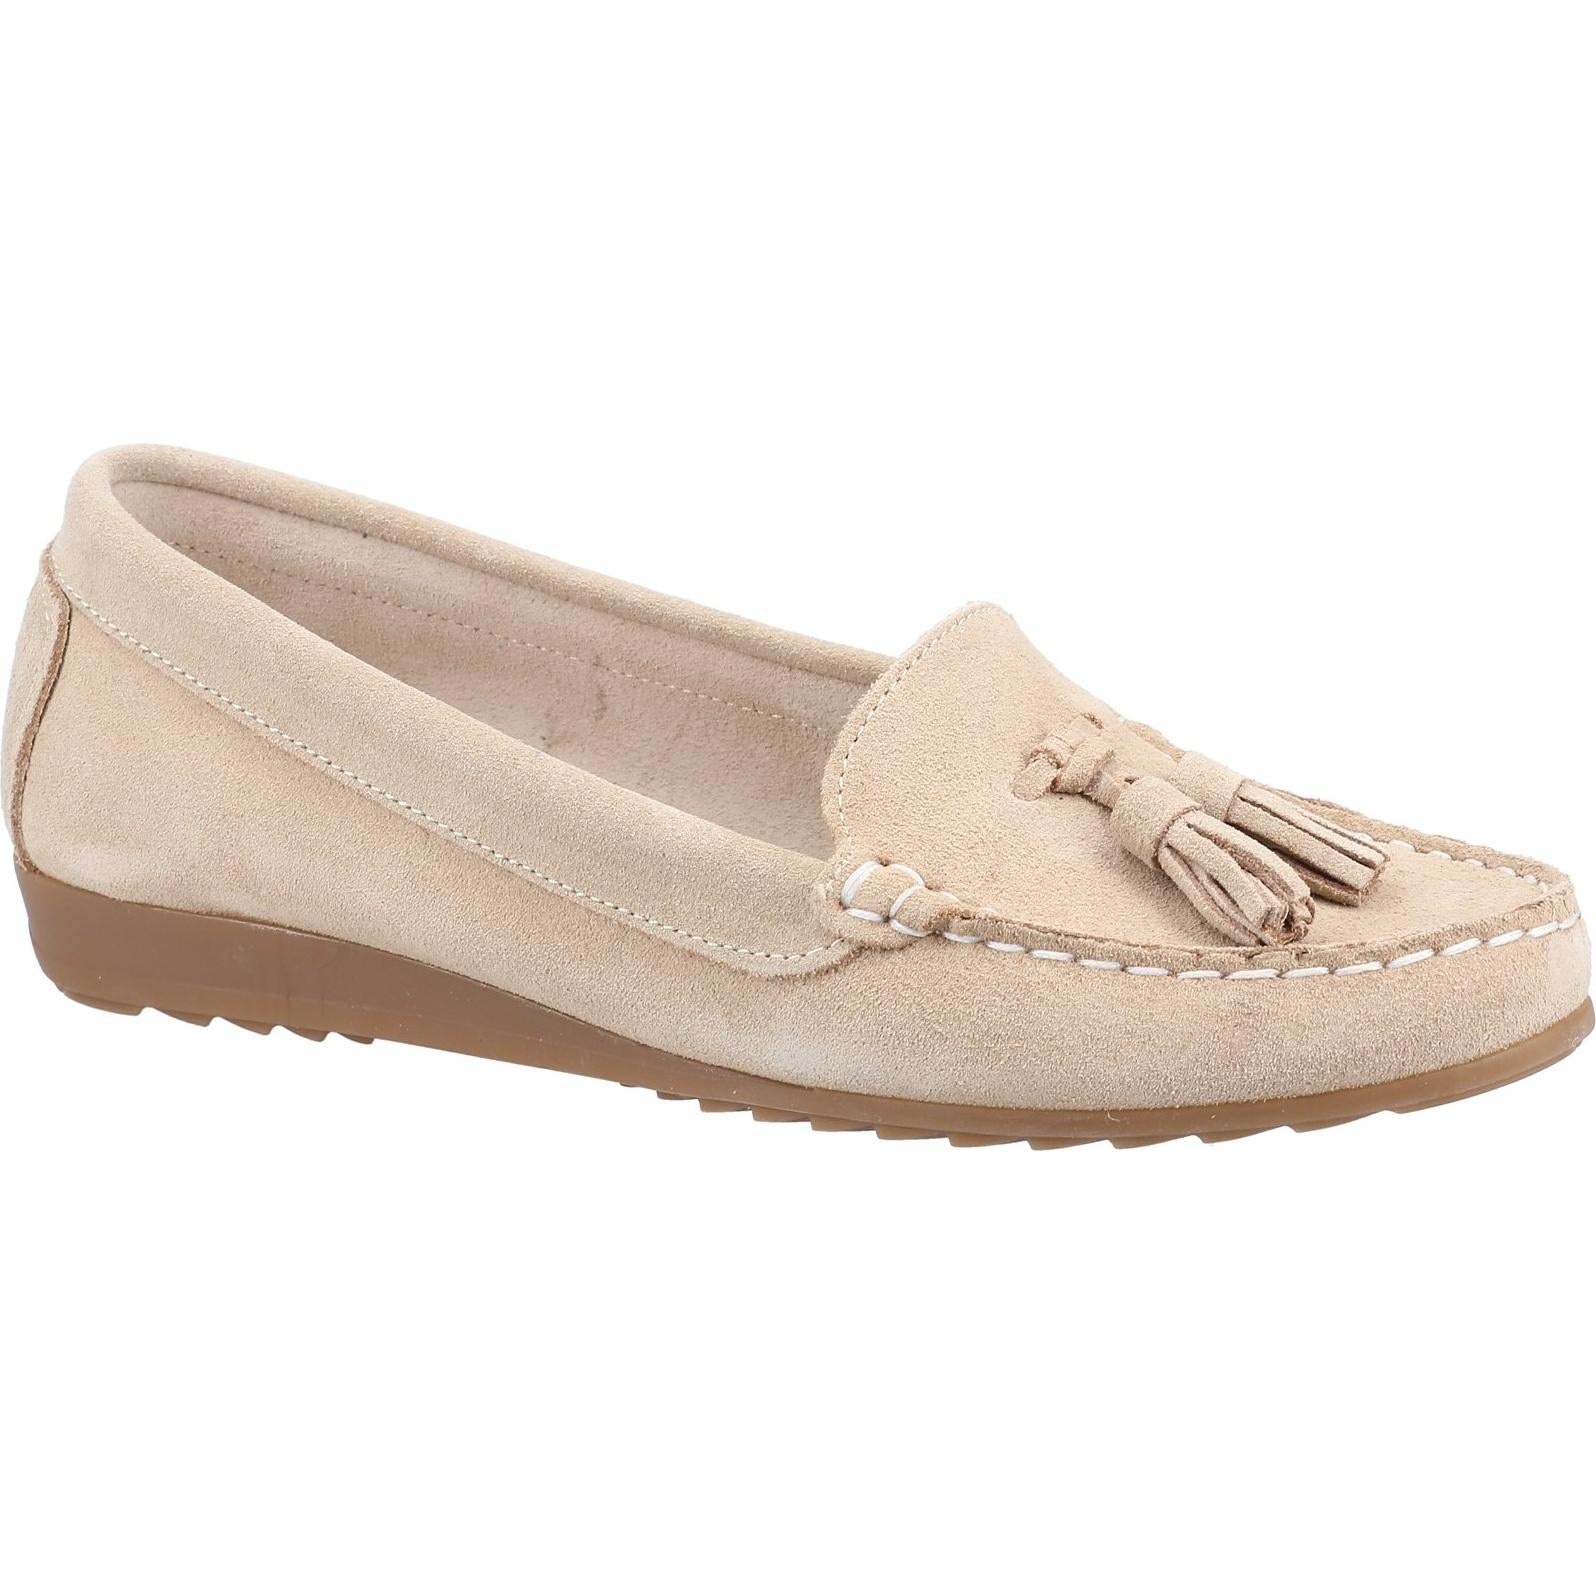 Riva Aldons Moccasin with Tassels Flats